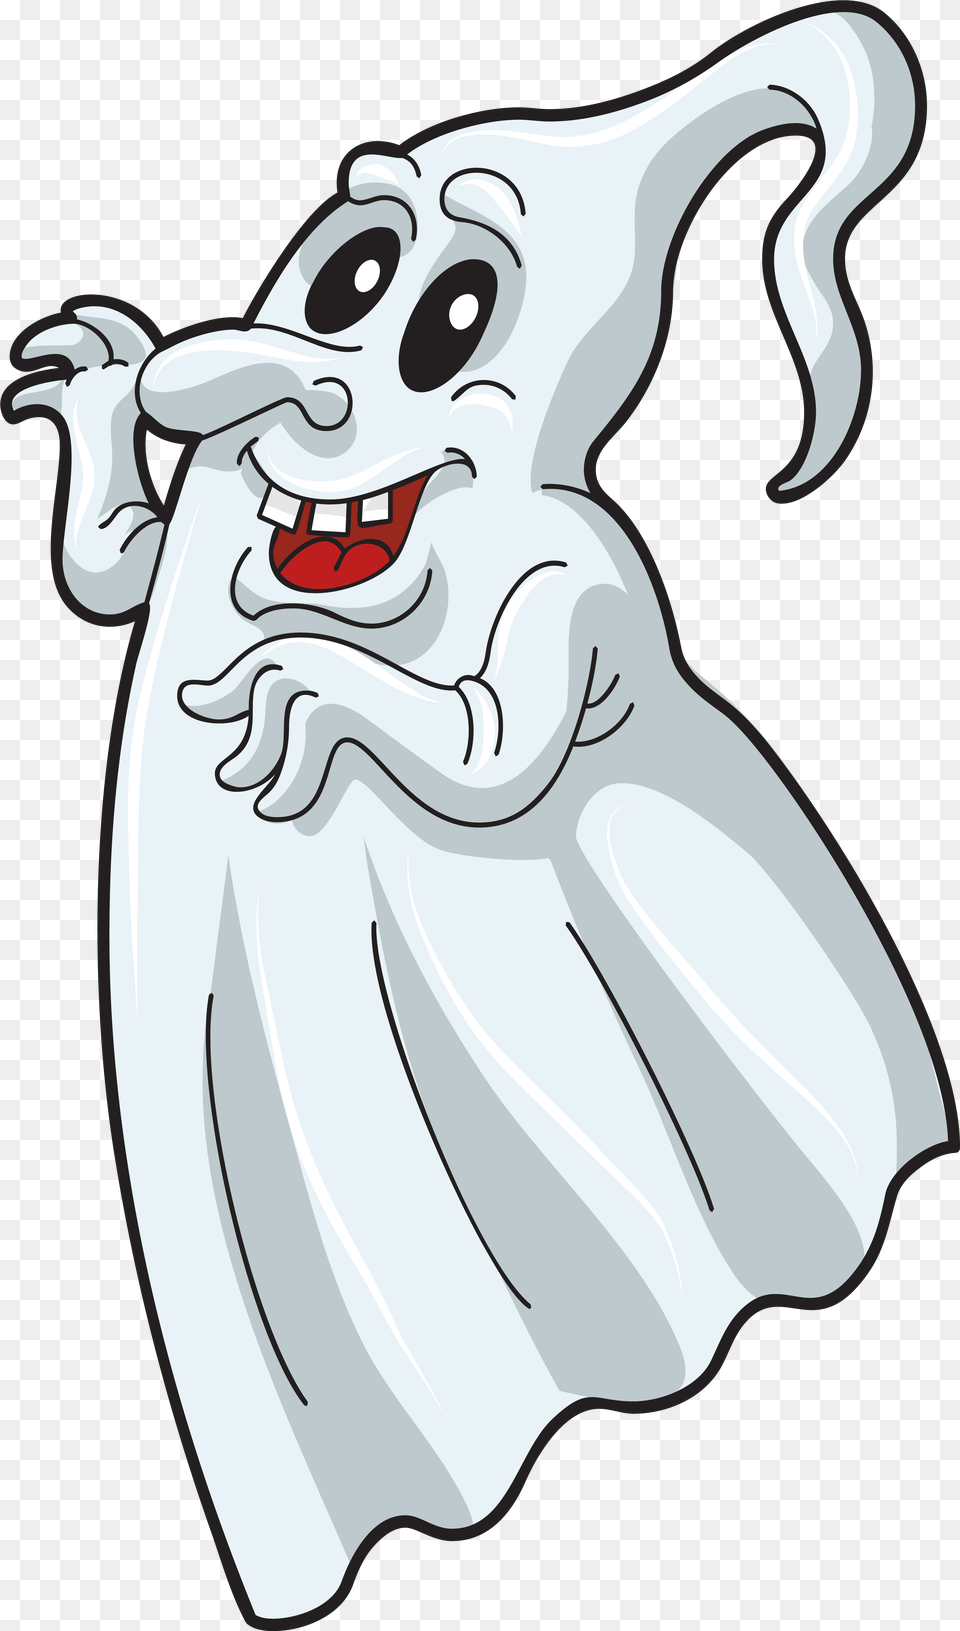 Ghost Animated Transparent Background Halloween Ghost, Art, Animal, Fish, Sea Life Png Image